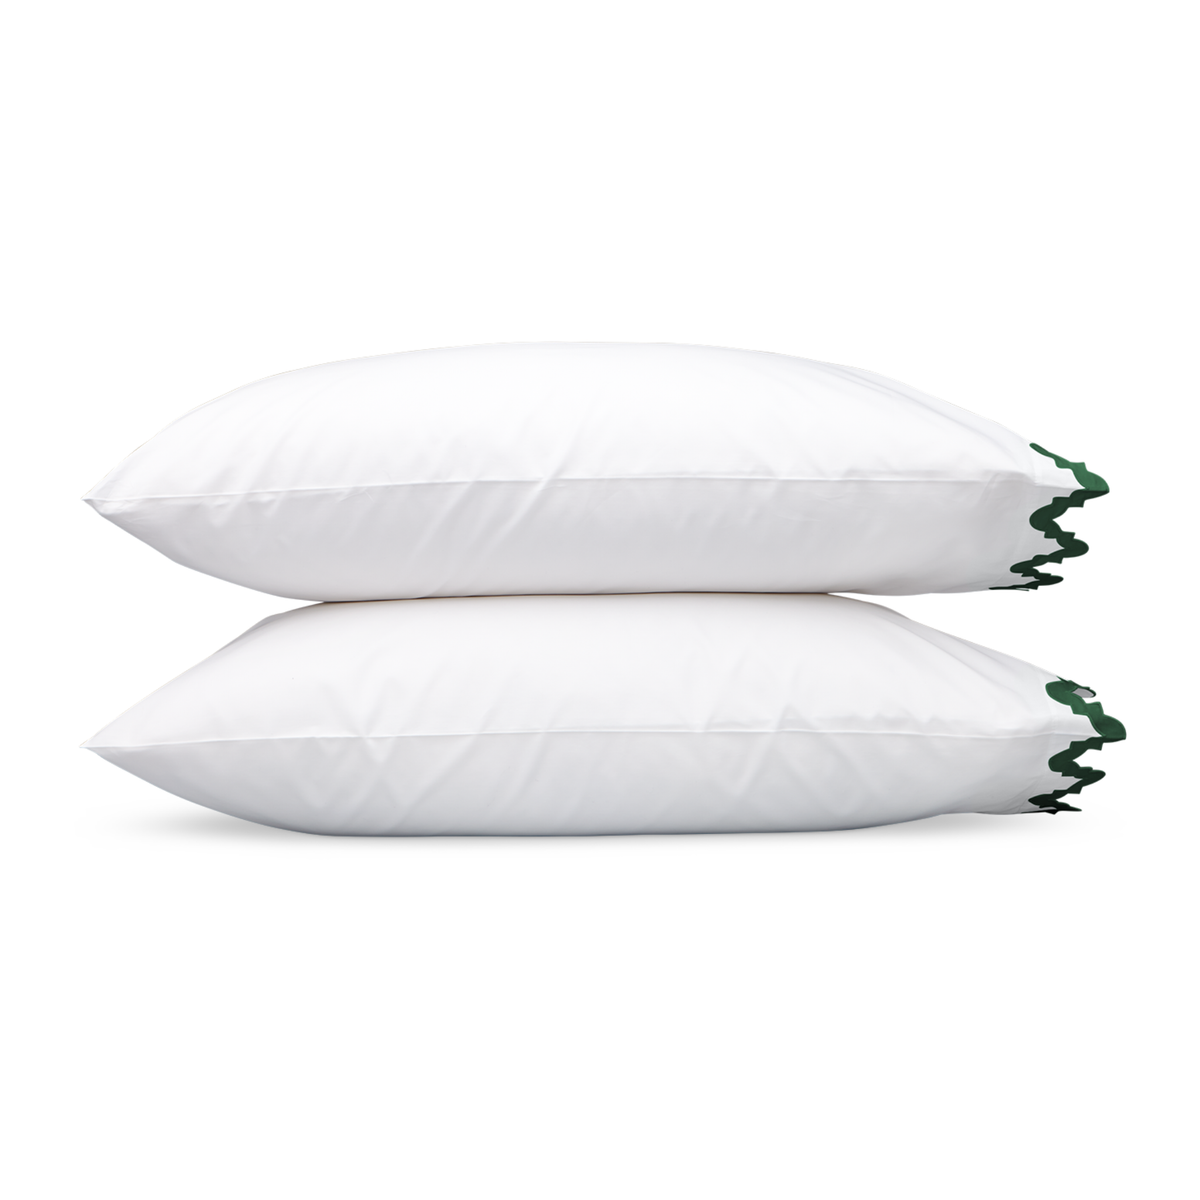 Pair of Pillowcases of Matouk Aziza Bedding in Green Color